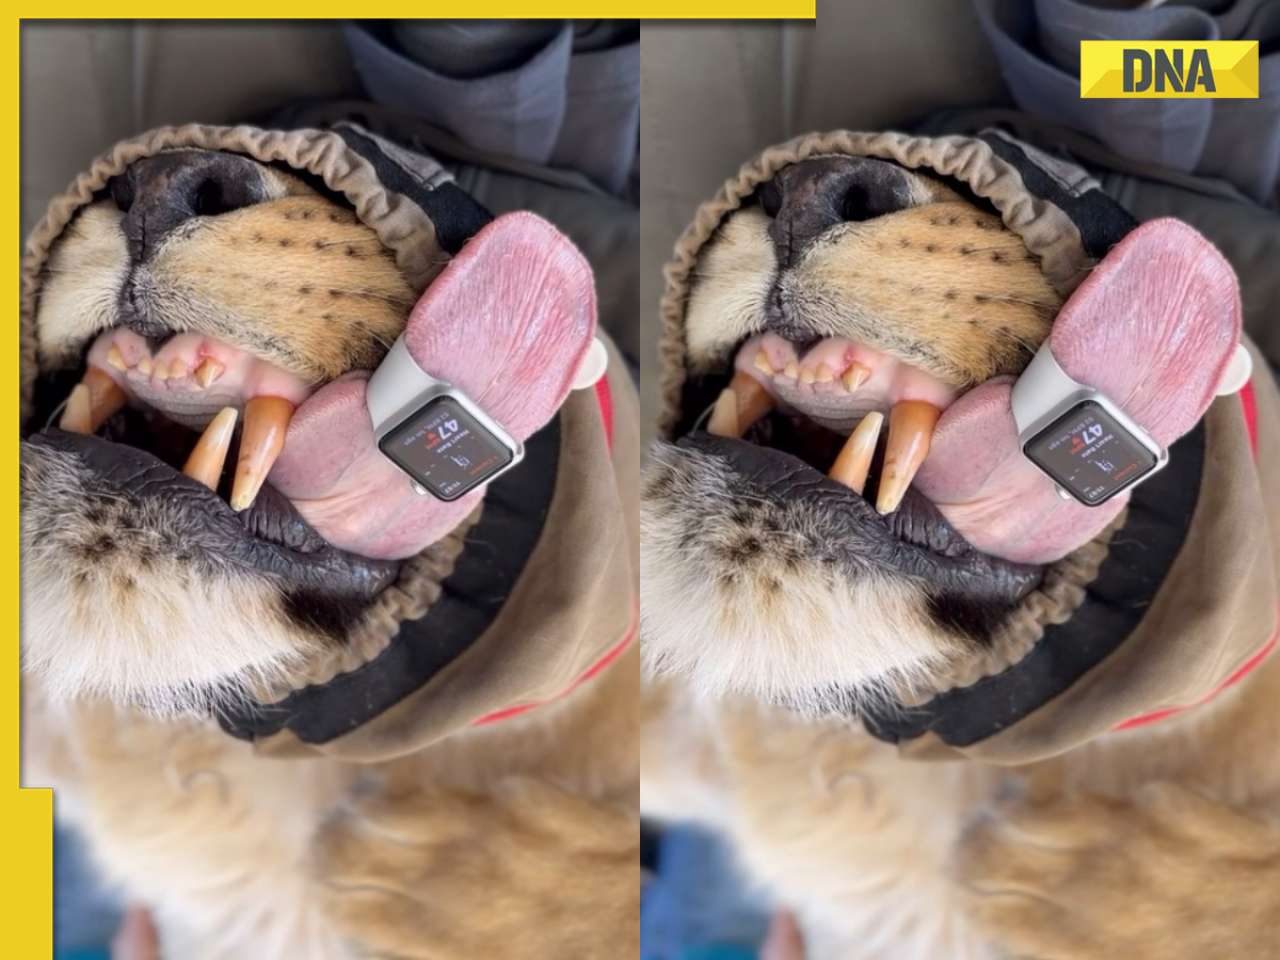 Vet monitors lion's heart rate using Apple watch, video goes viral